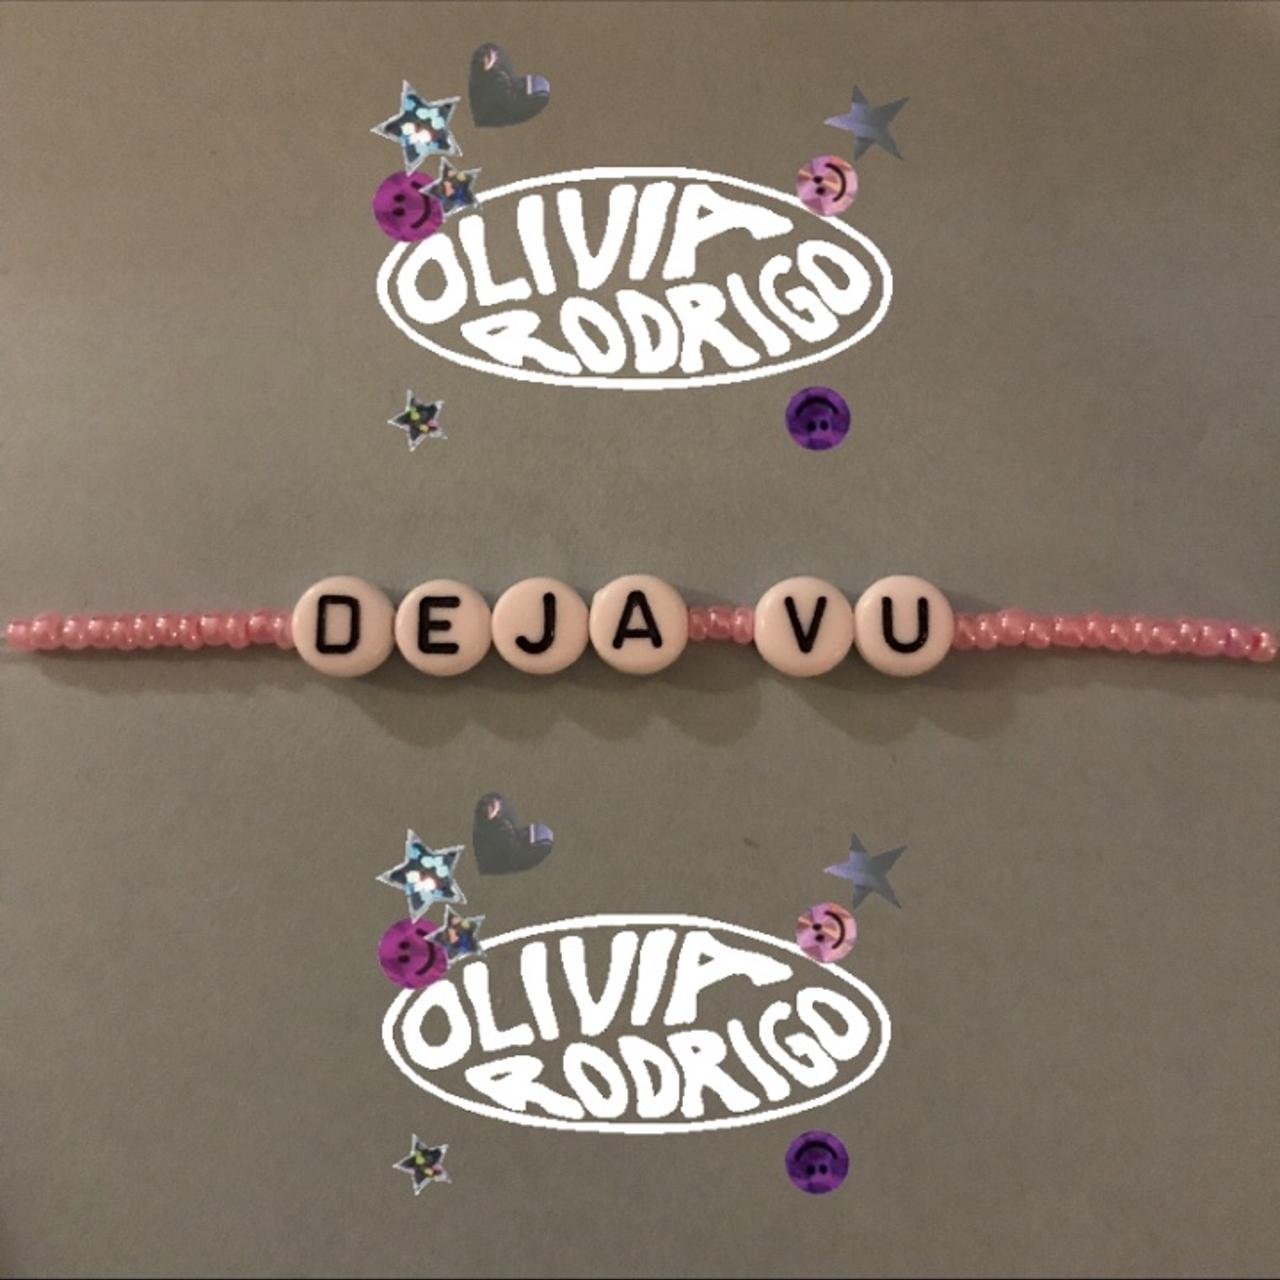 Sour Beaded Bracelet, I Can't Wait to Avoid Parallel Parking While Wearing Olivia  Rodrigo's New Sour Collection